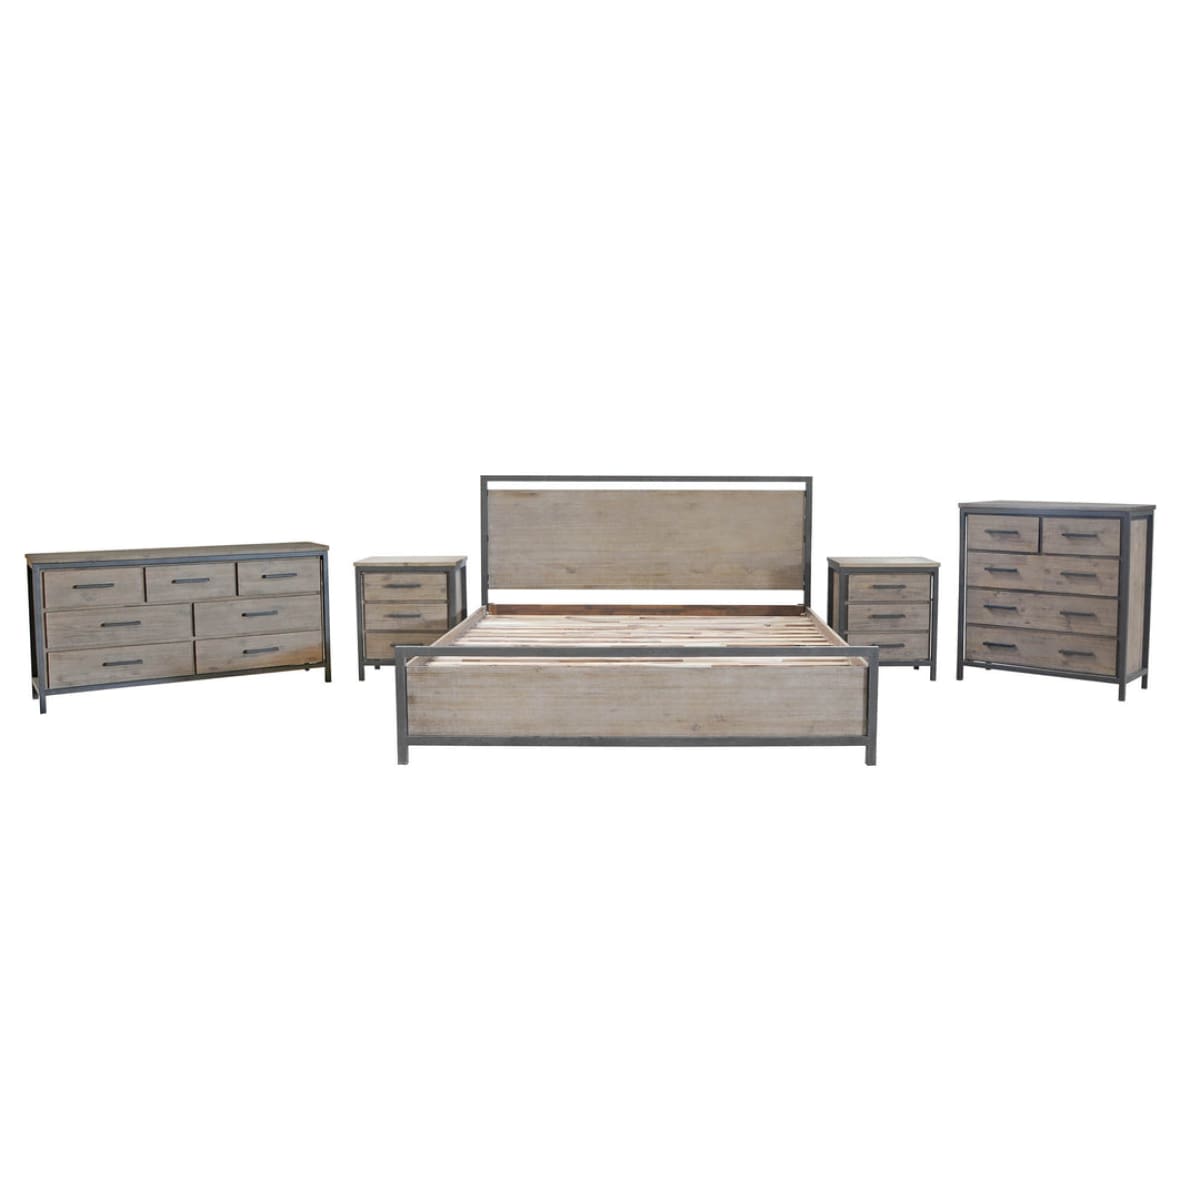 Irondale 5 Drawer Chest - lh-import-dressers